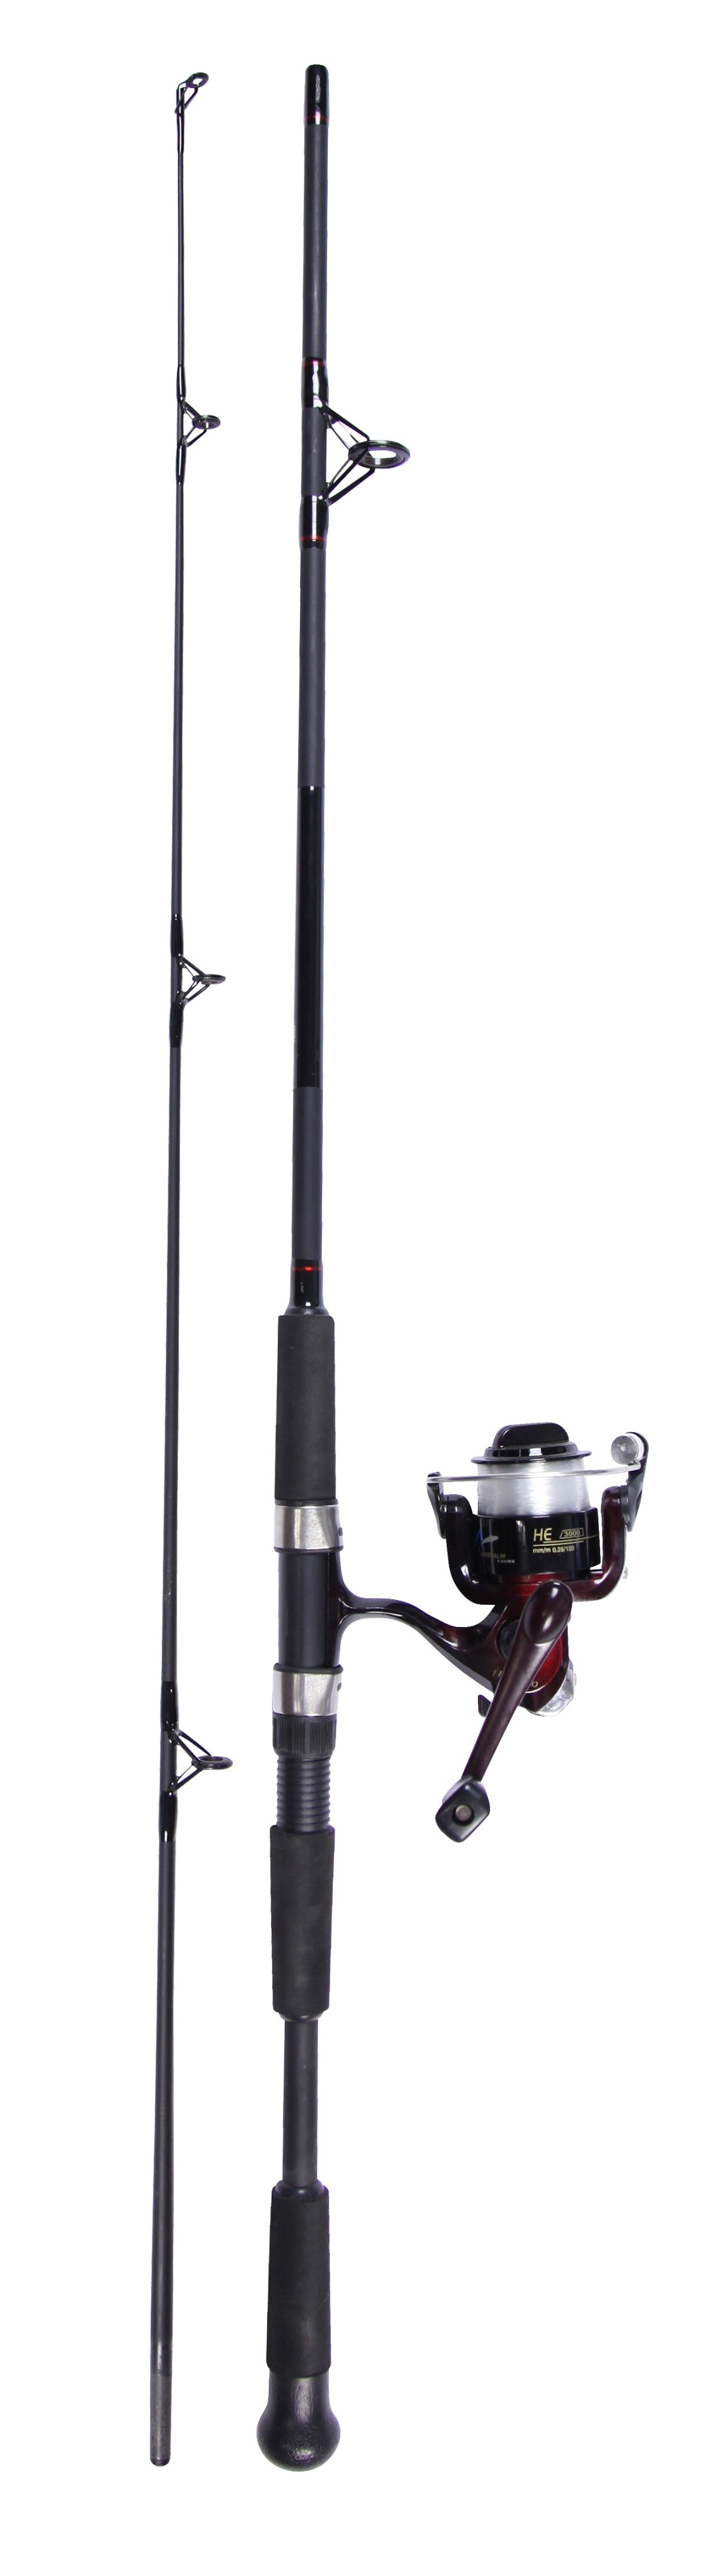 Adrenalin 8ft Rod and Reel Combo